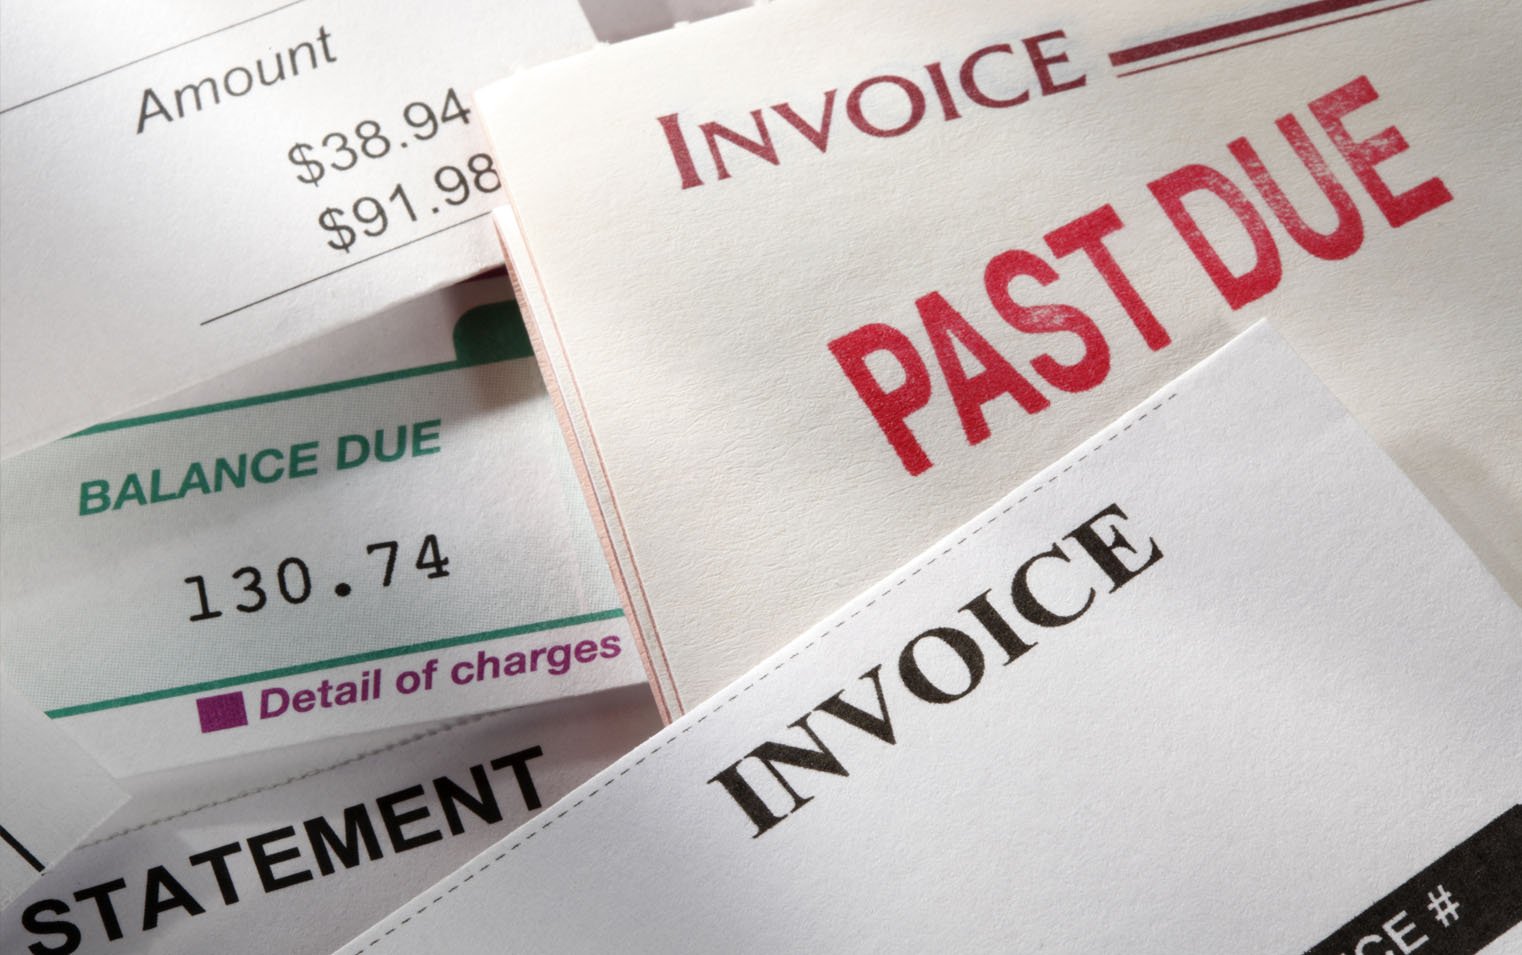 Stack of papers with "invoice," "past due" and "balance due"due prominently displayed on each